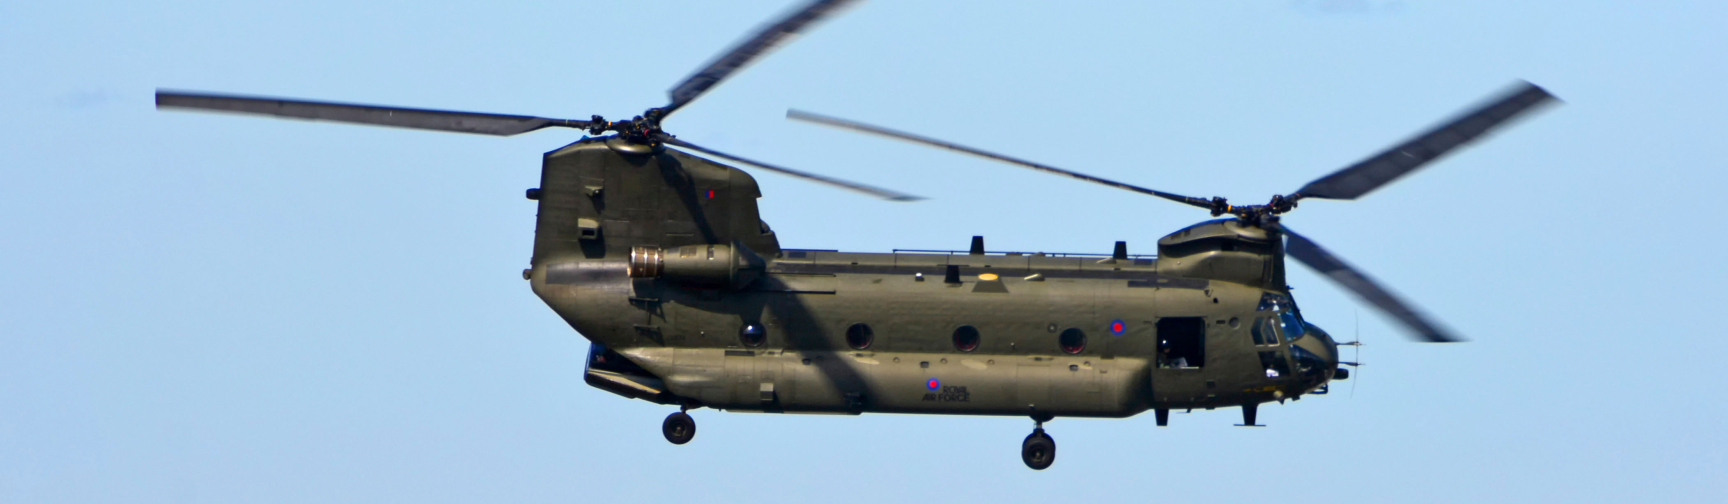 Image of a chinook helicopter